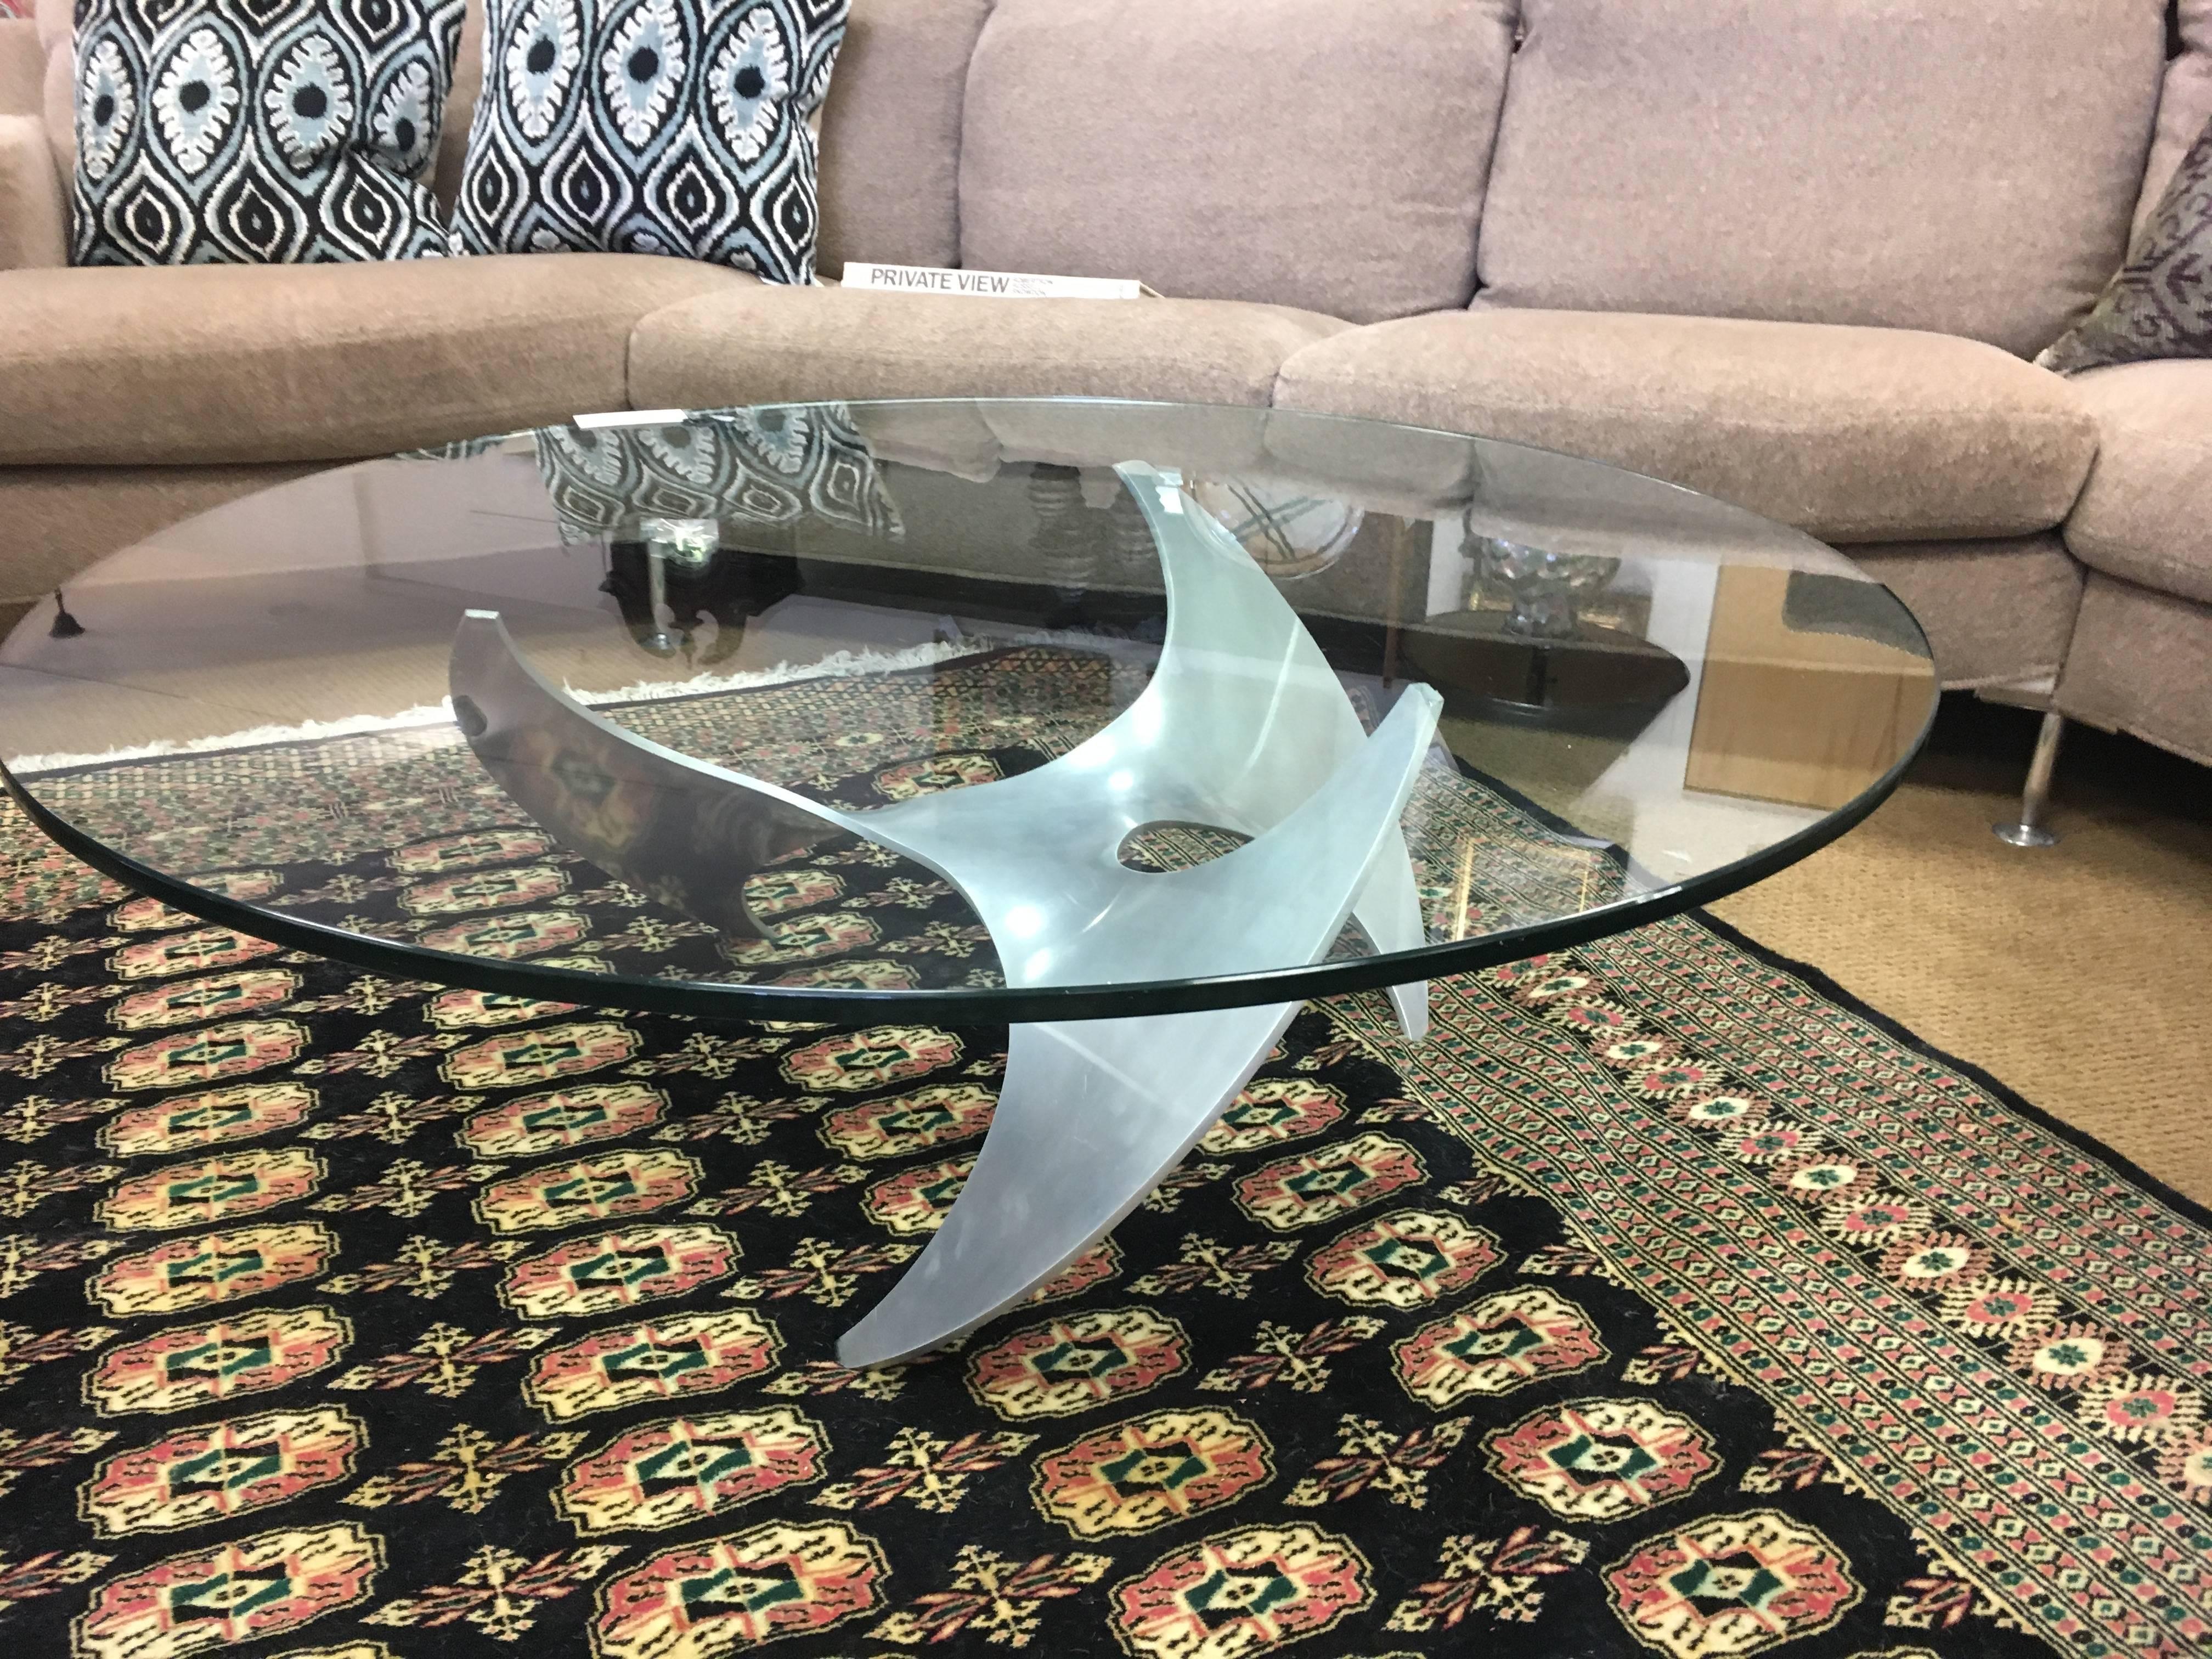 Steel Knut Hesterberg Atomic Propeller Coffee Cocktail Glass Table